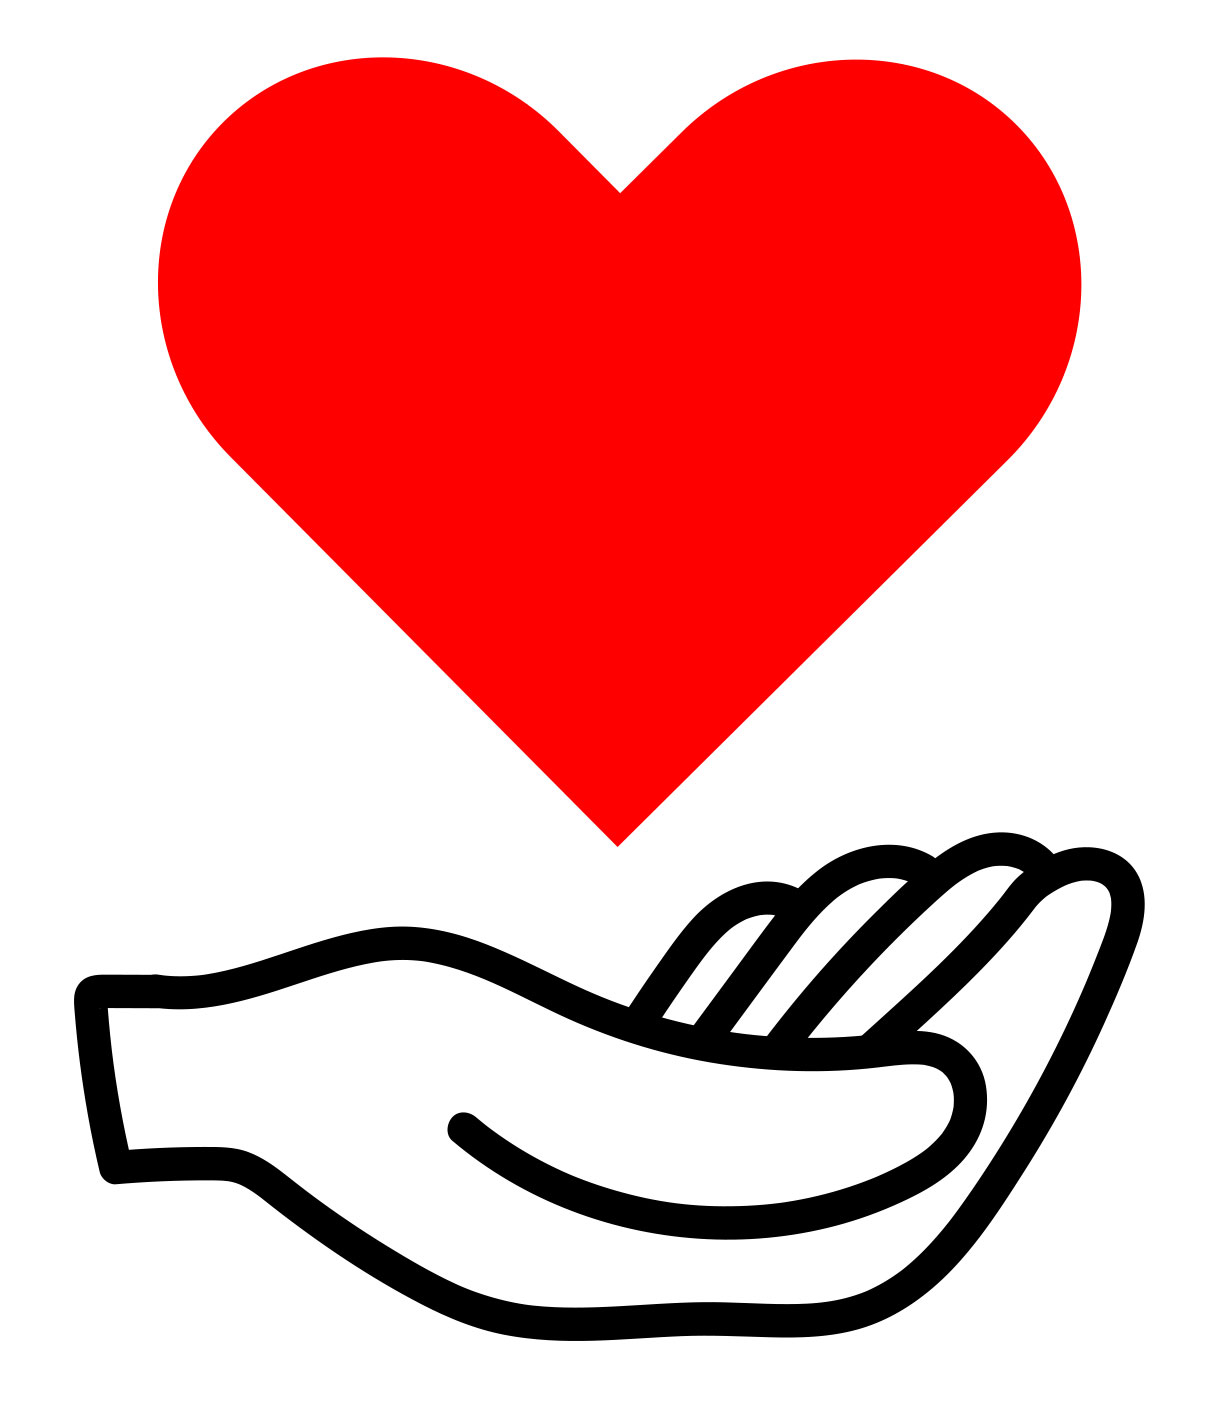 a hand with a heart above it used as an icon for making a donation